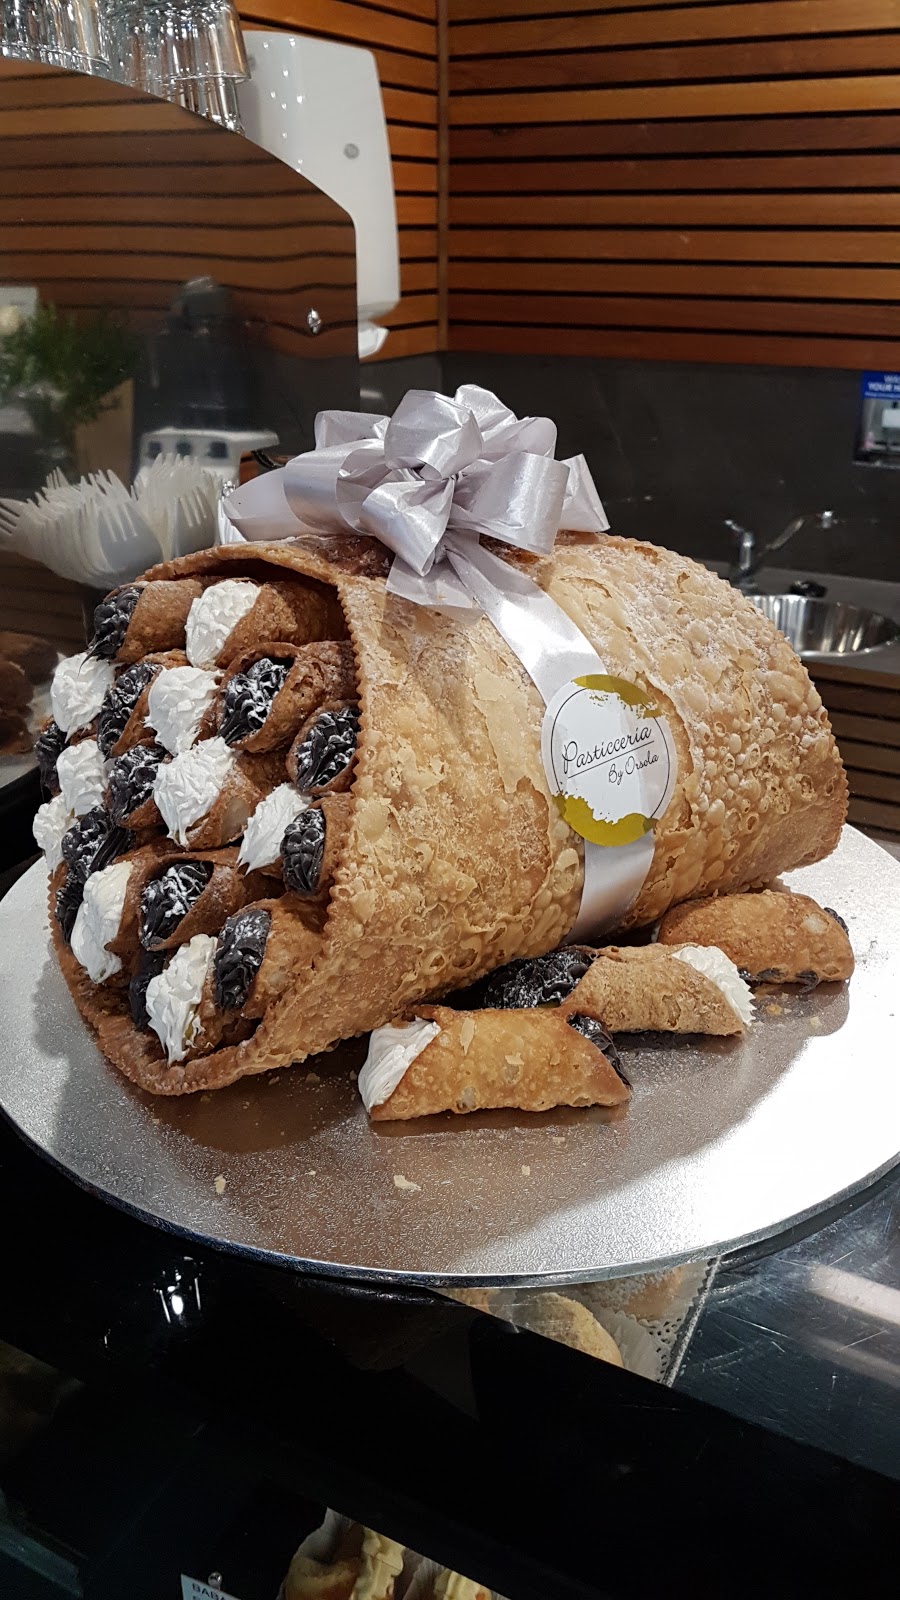 Pasticceria by Orsola | bakery | 134 Crittenden Rd, Findon SA 5023, Australia | 0413181585 OR +61 413 181 585